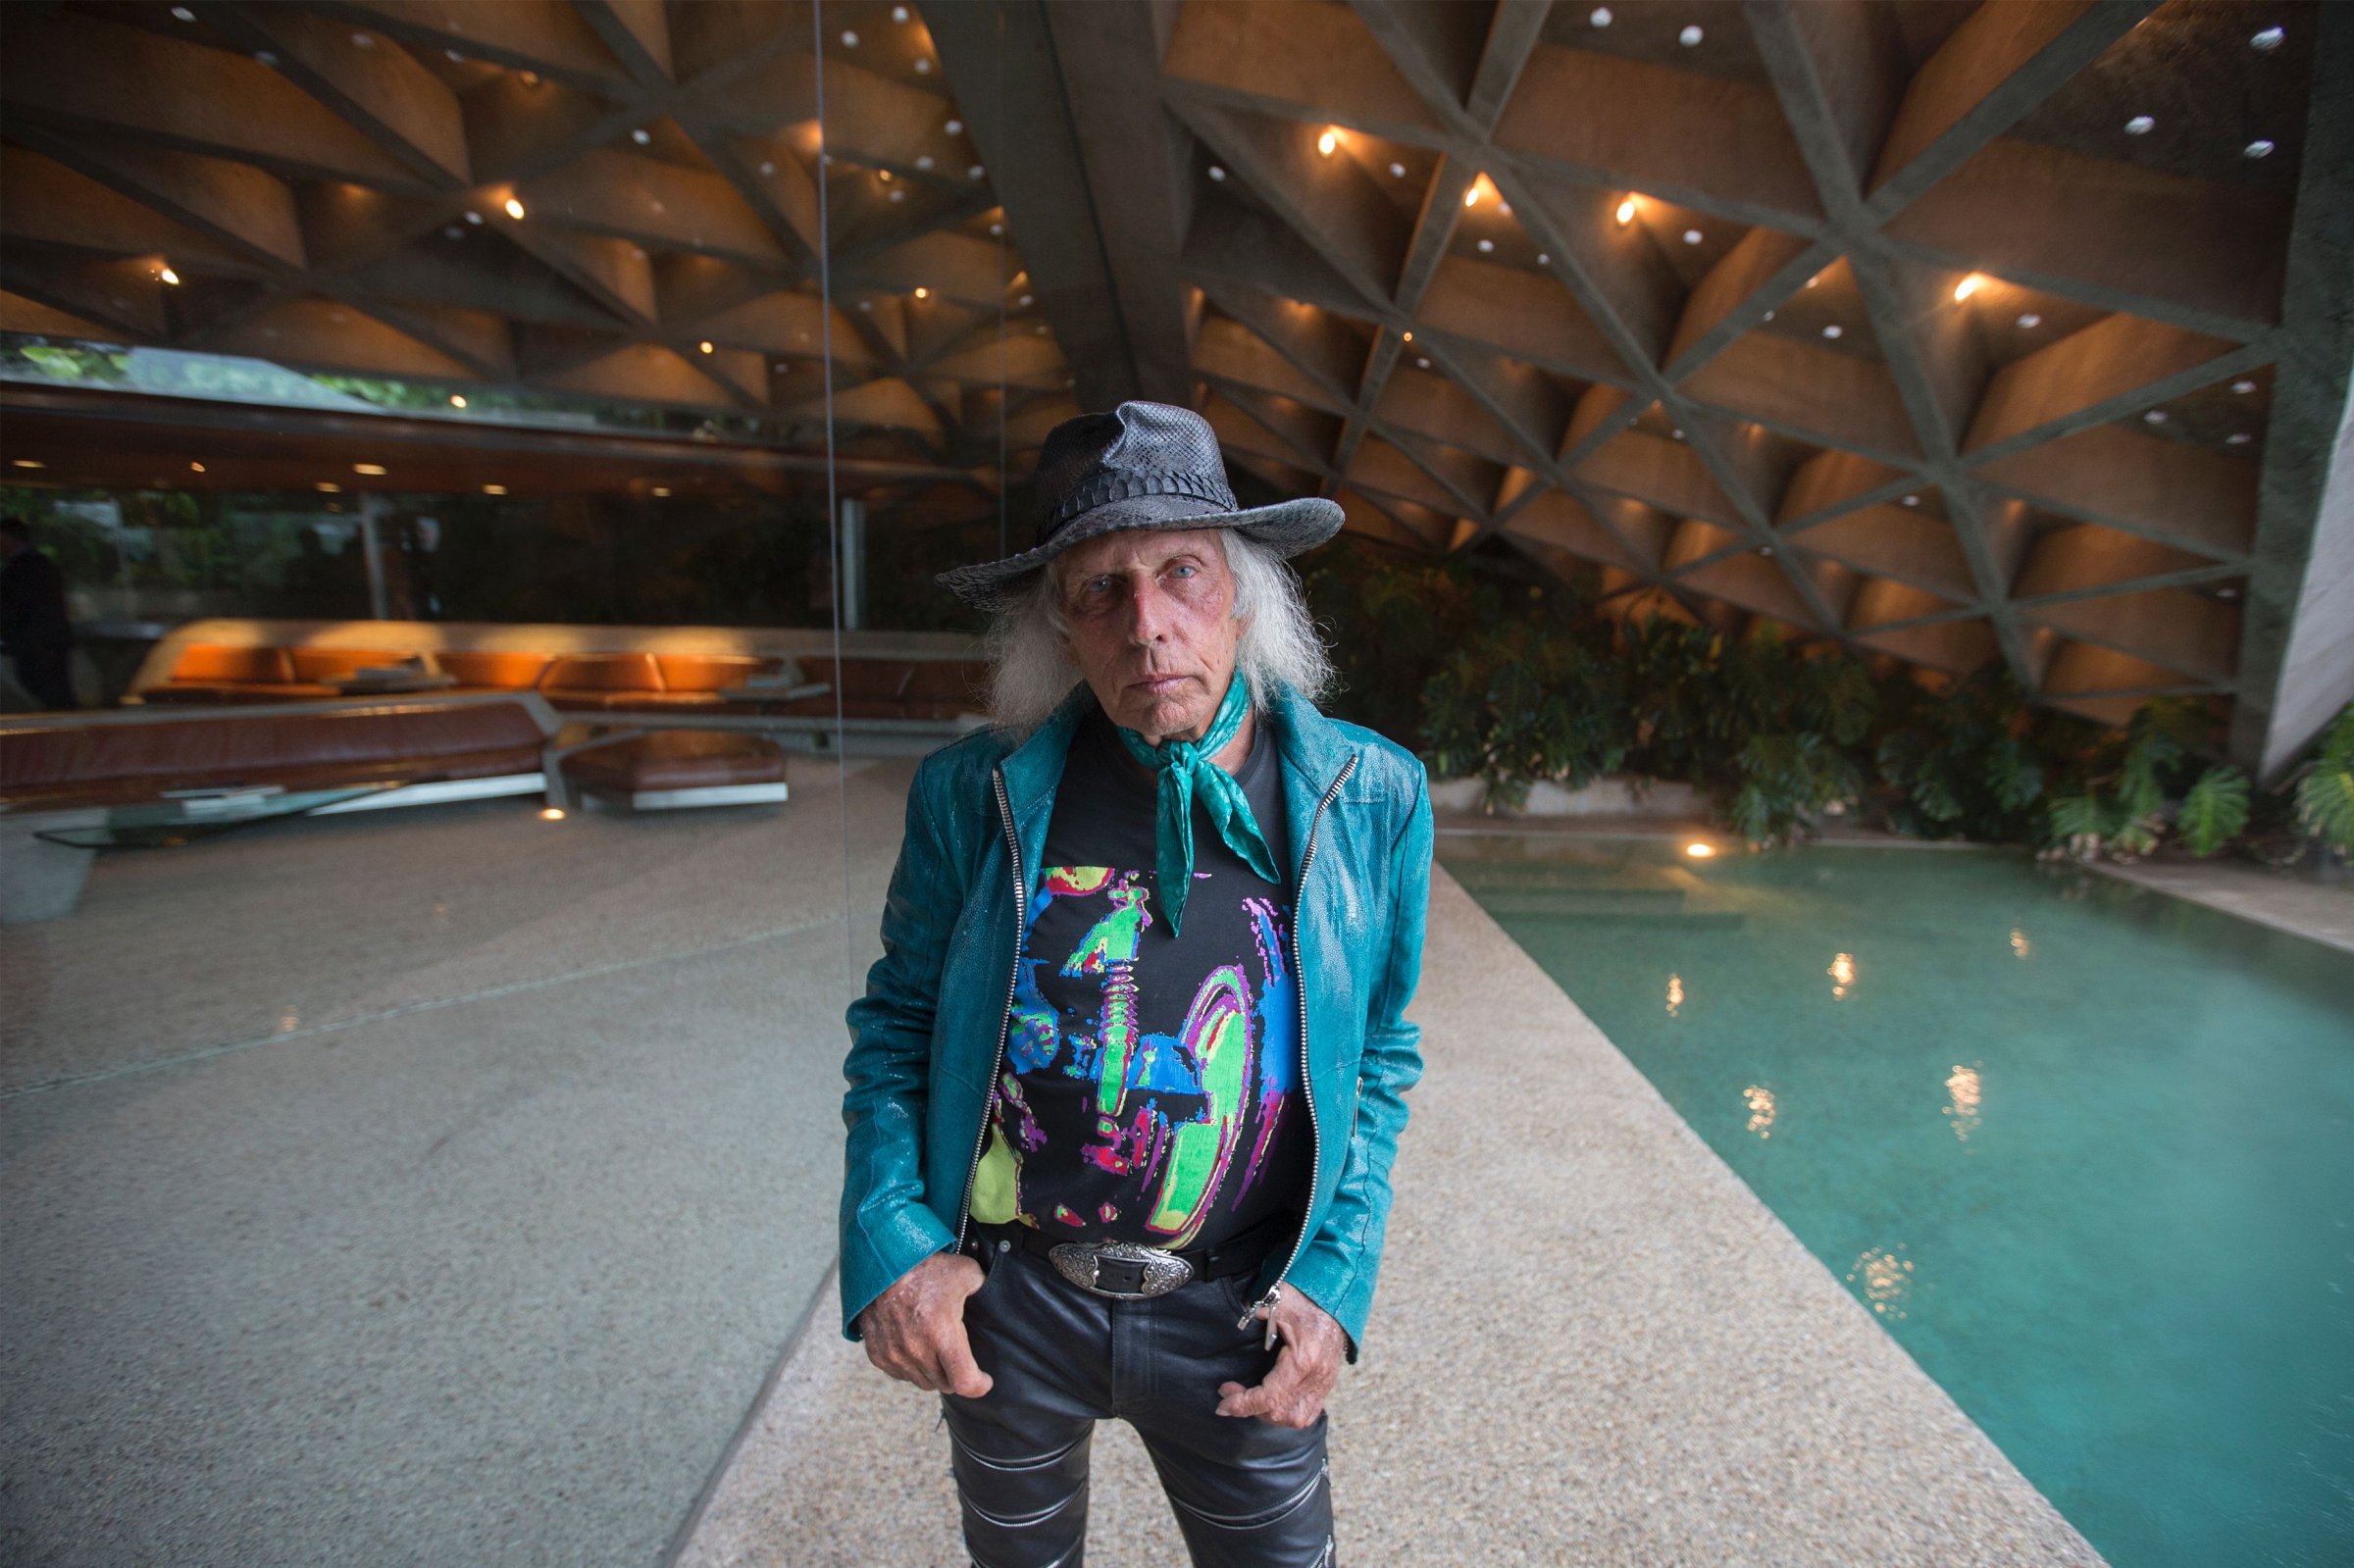 James Goldstein during a tour of the John Lautner-designed home, being donated to the Los Angeles County Museum of Art by fashion and basketball aficionado James Goldstein on Feb. 16, 2016 in Beverly Hills, Calif.